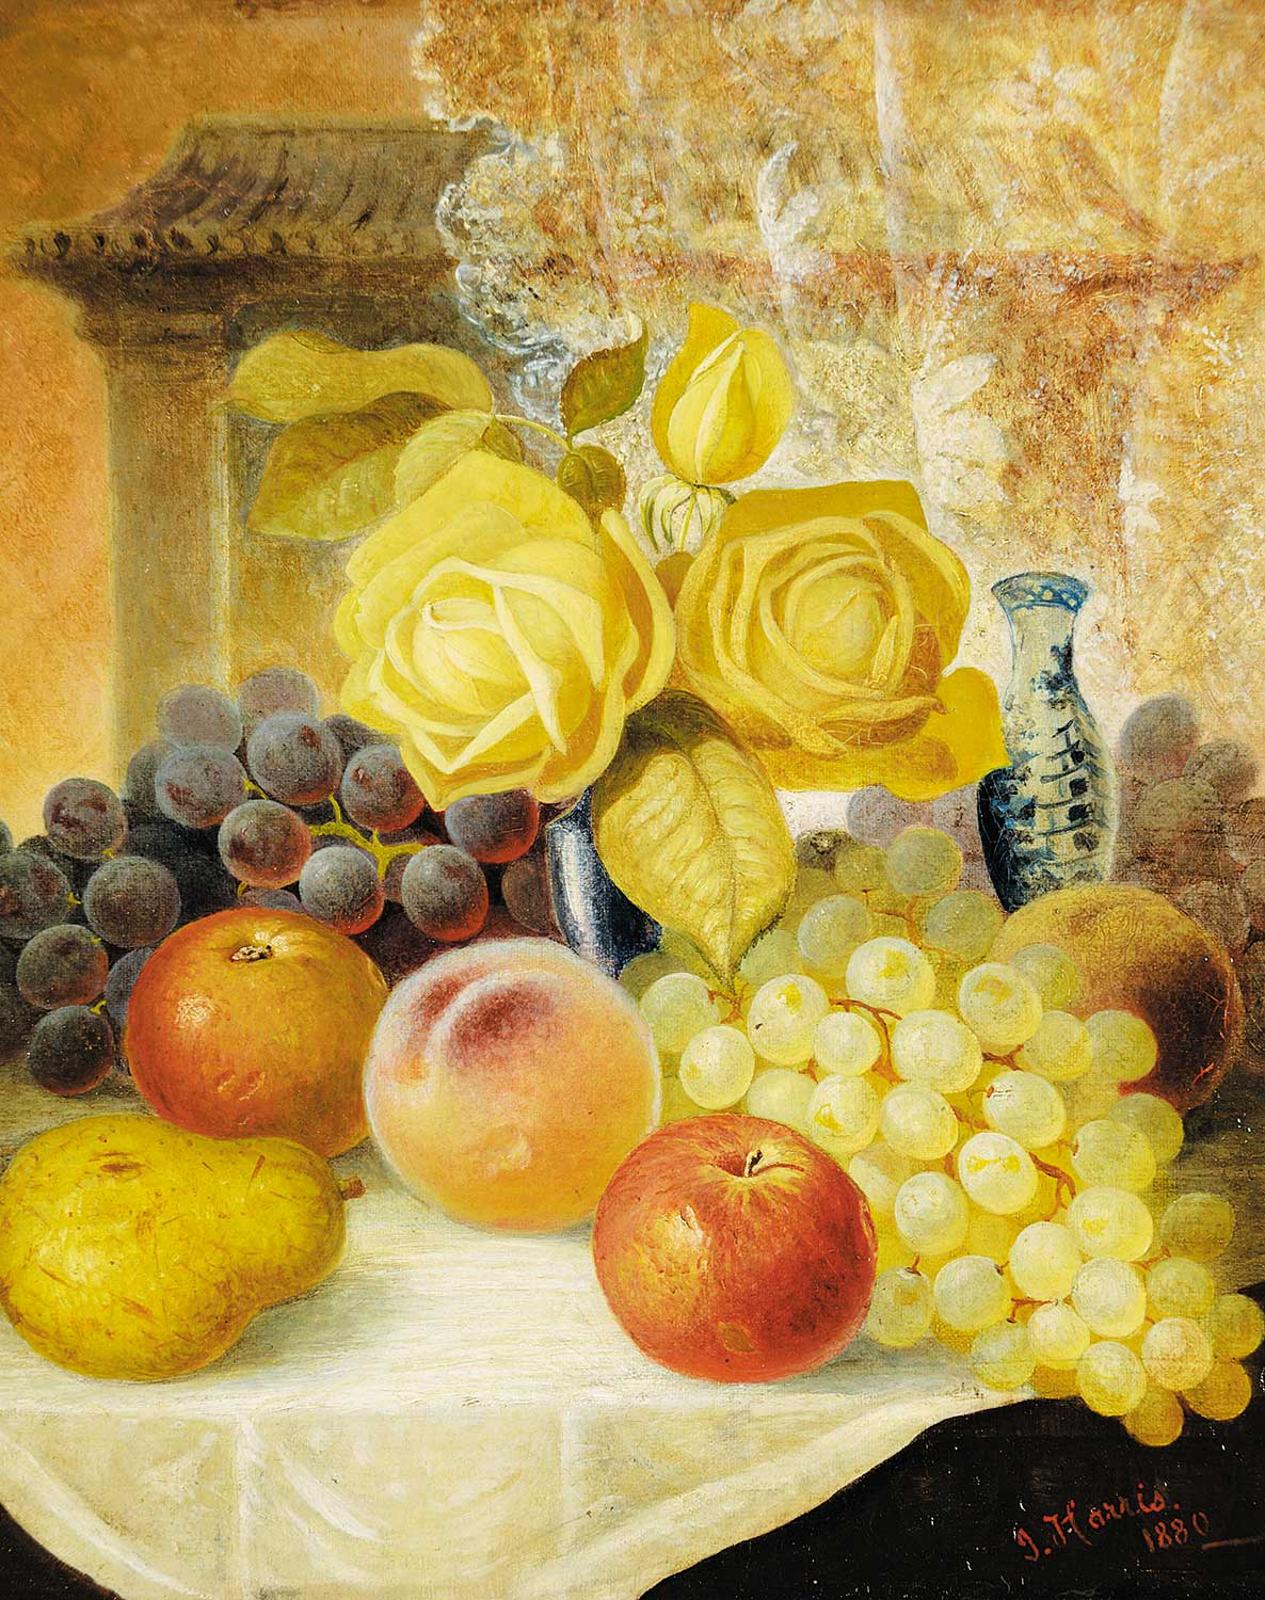 J. Harris Jr. - Untitled - Still Life with Fruits and White Roses